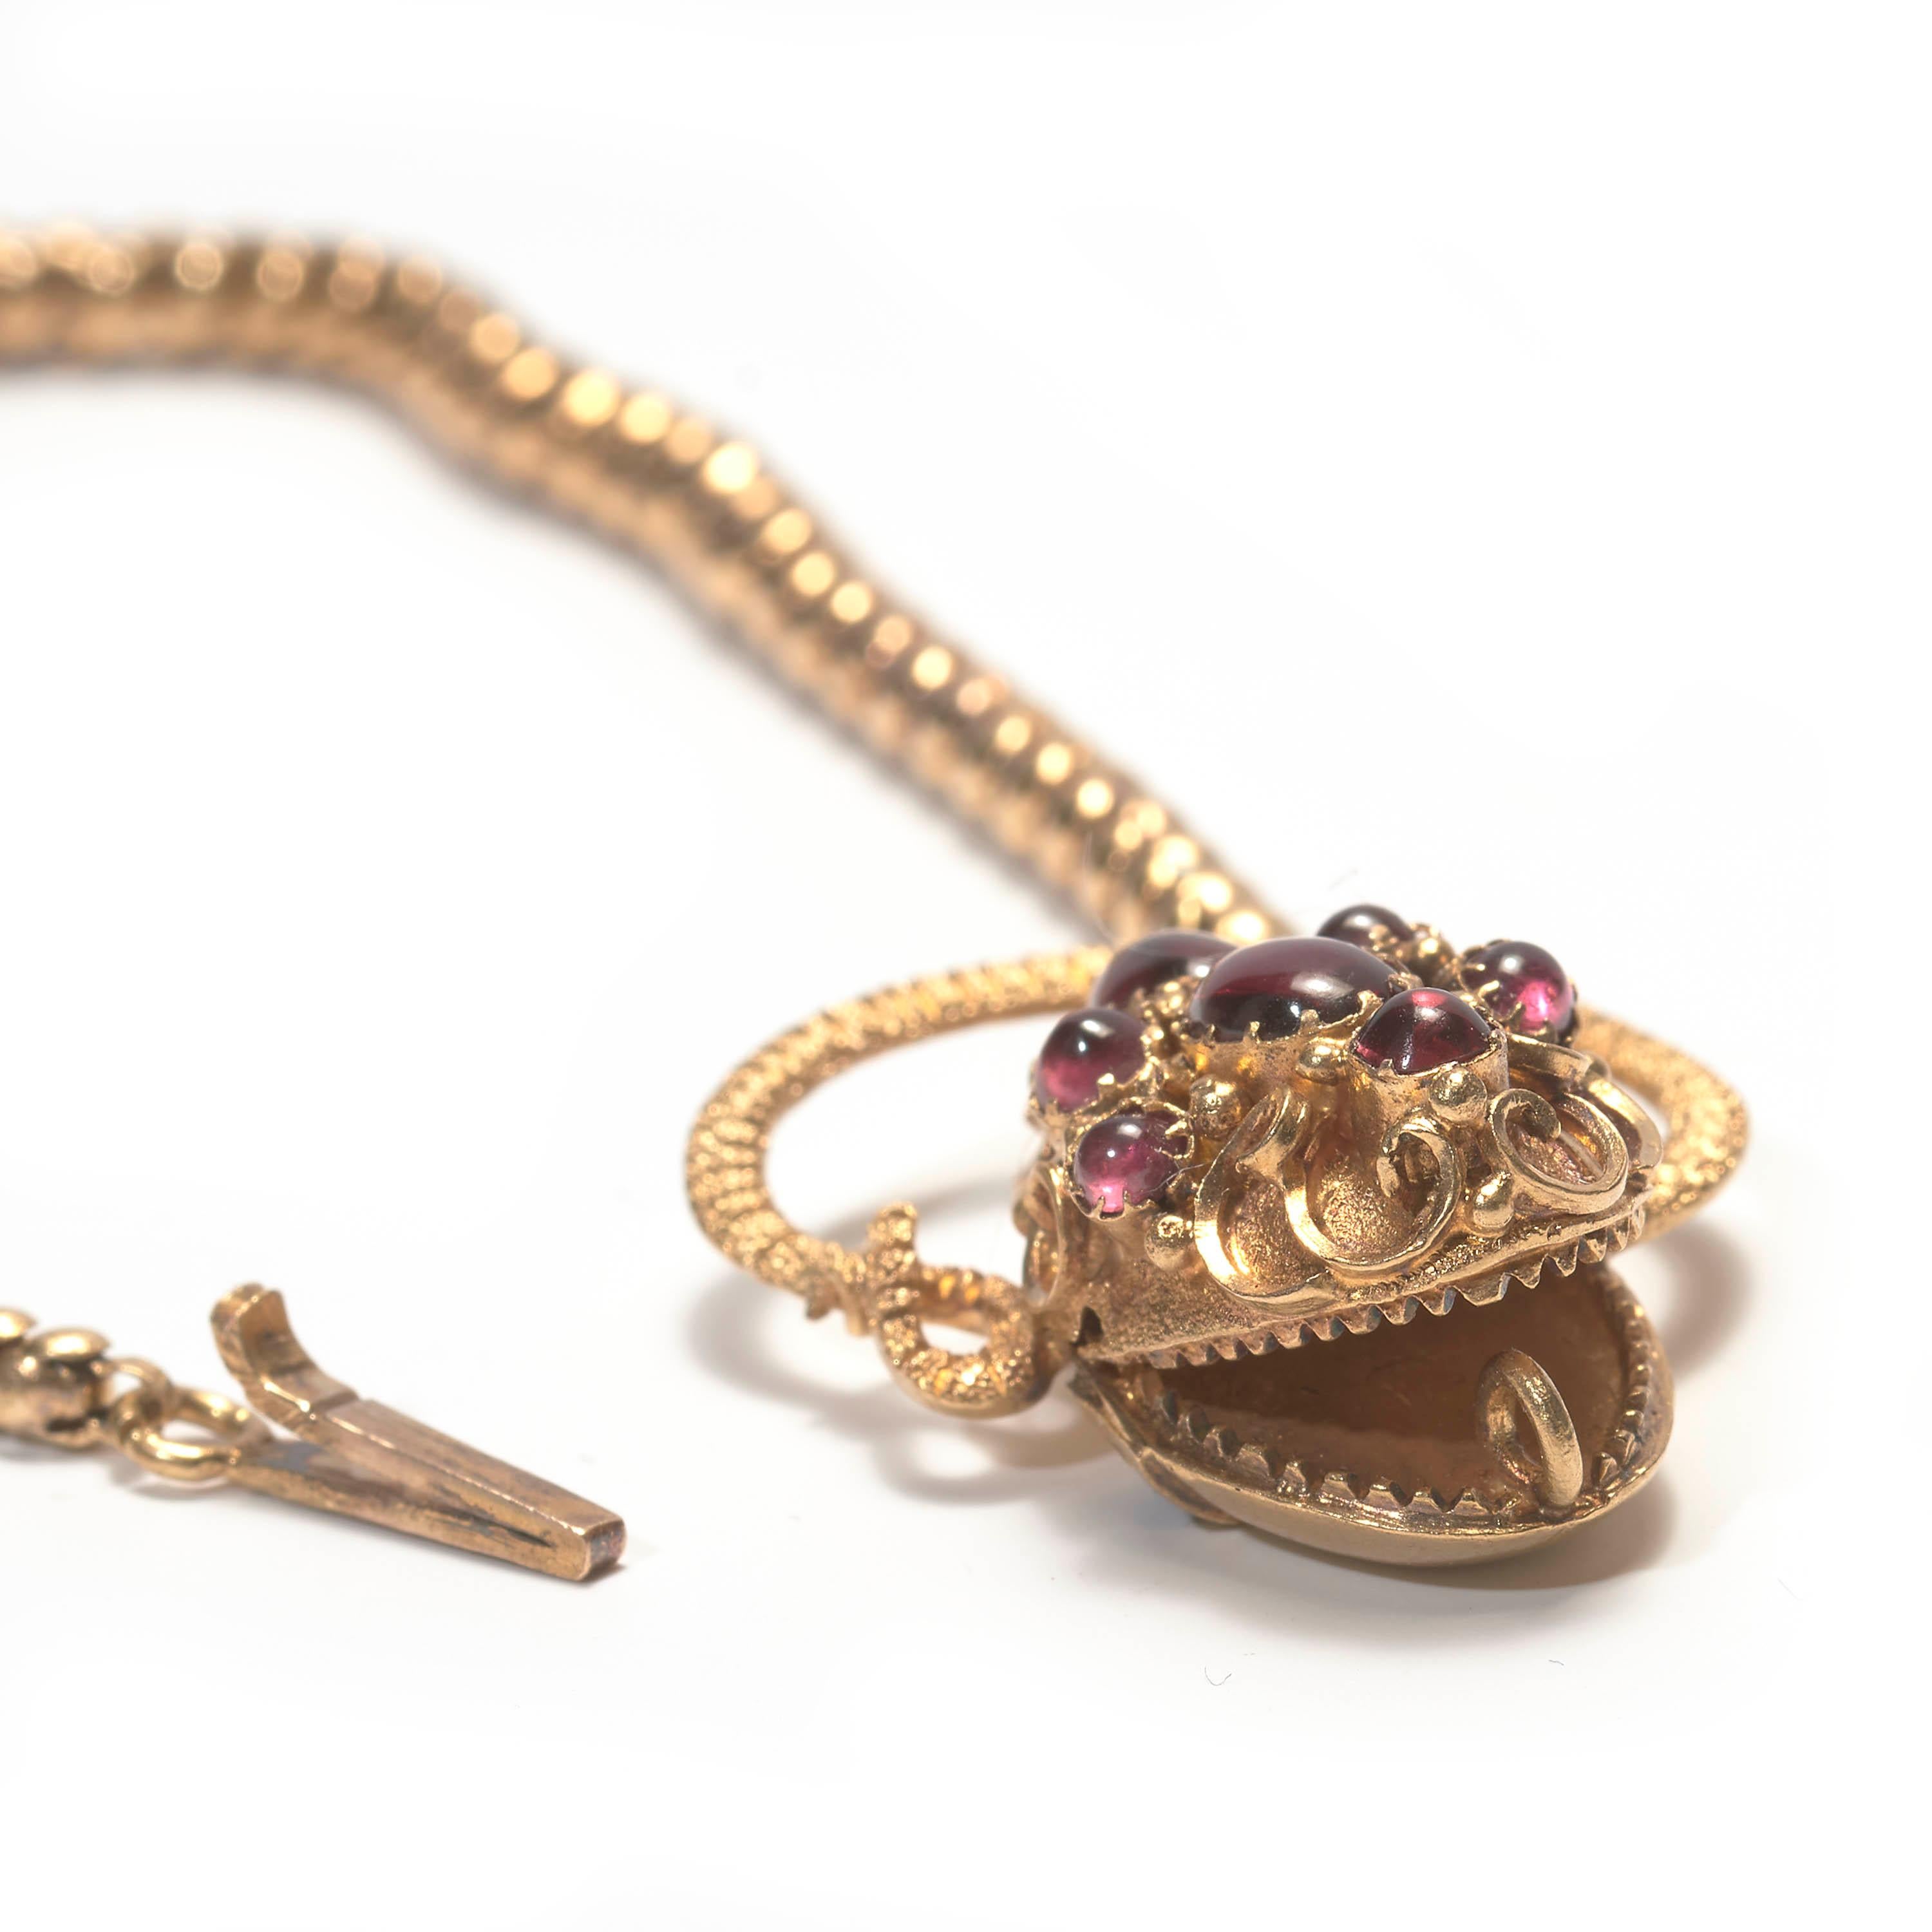 Cabochon Antique Garnet and Gold Snake Necklace, Circa 1840 For Sale